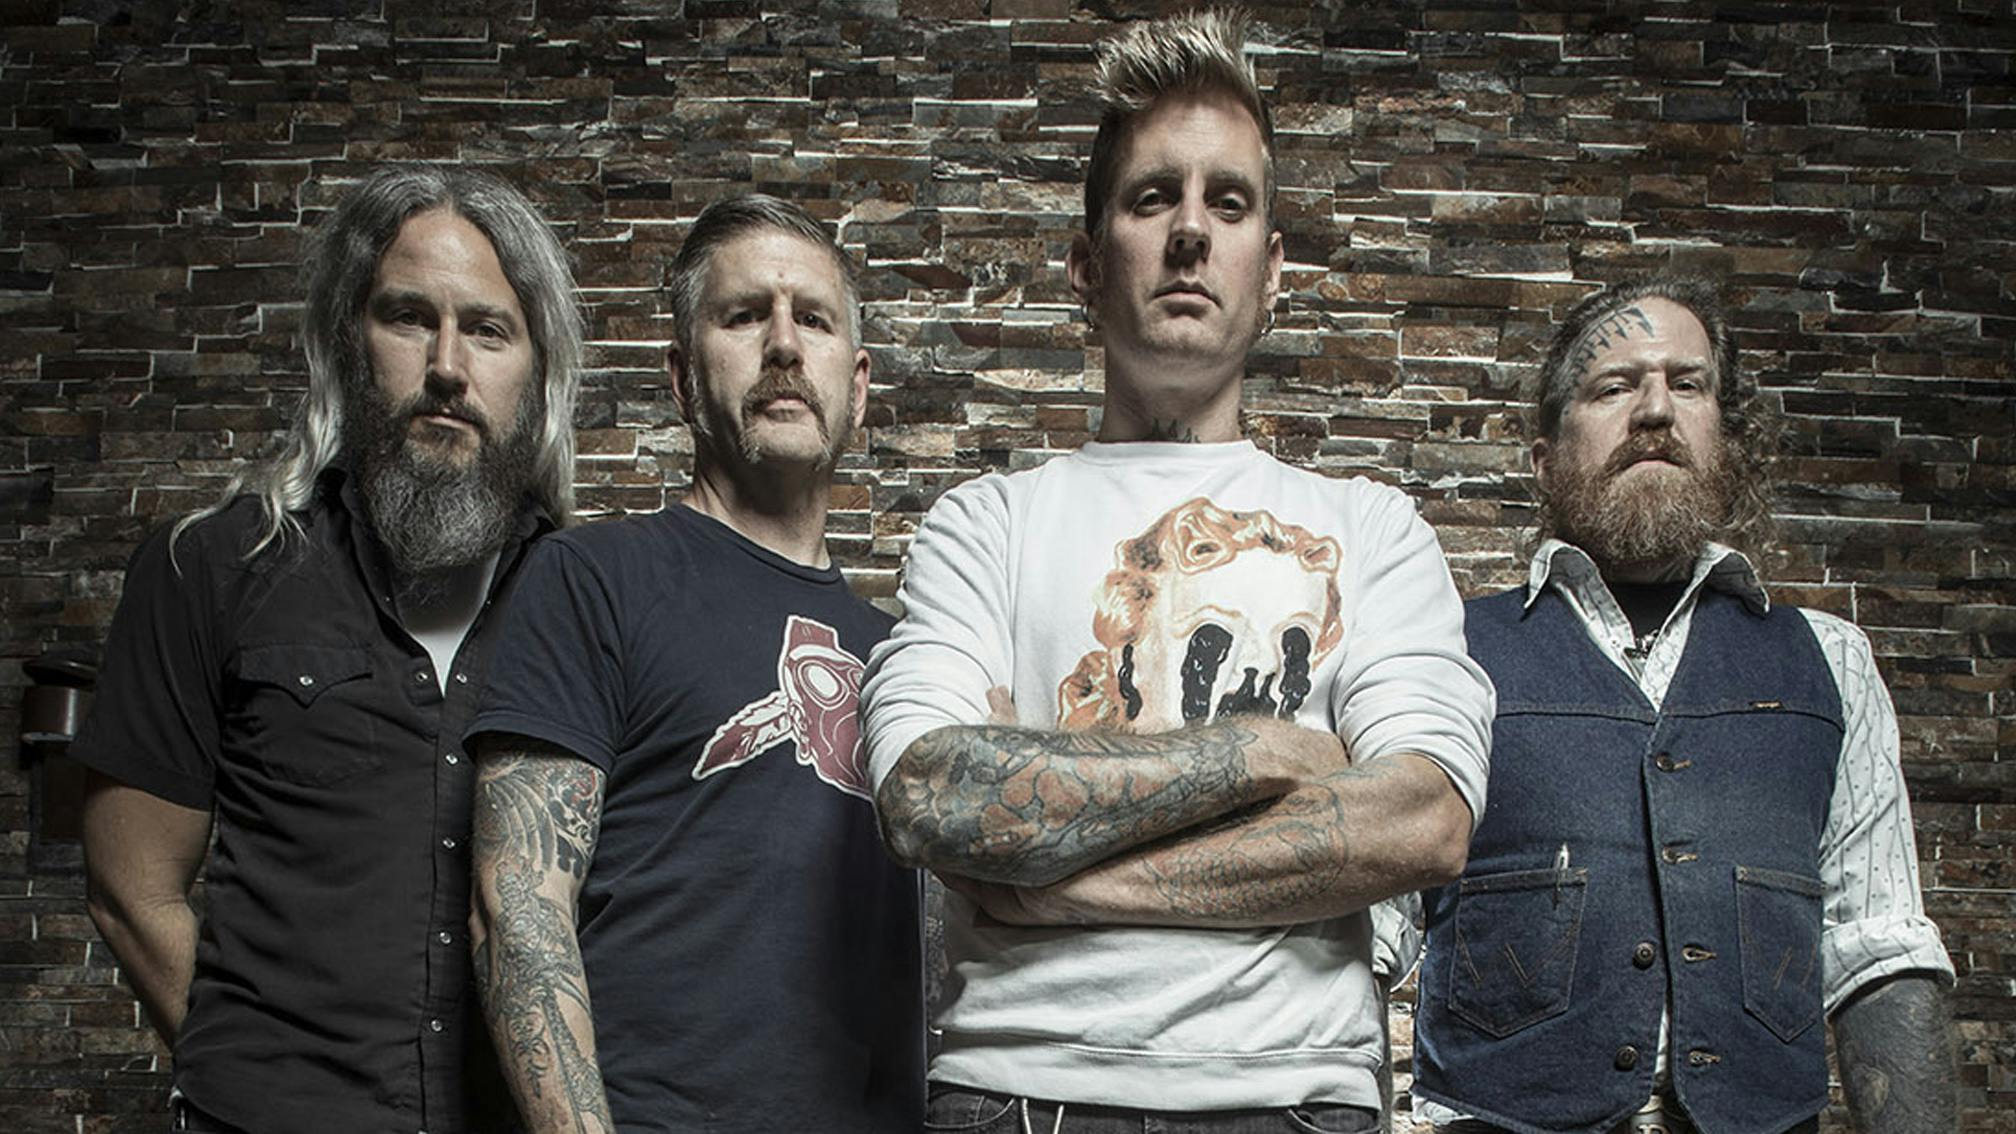 Mastodon Demoed 30 New Songs For Next Album: "It's Very Difficult For Us To Narrow It Down"